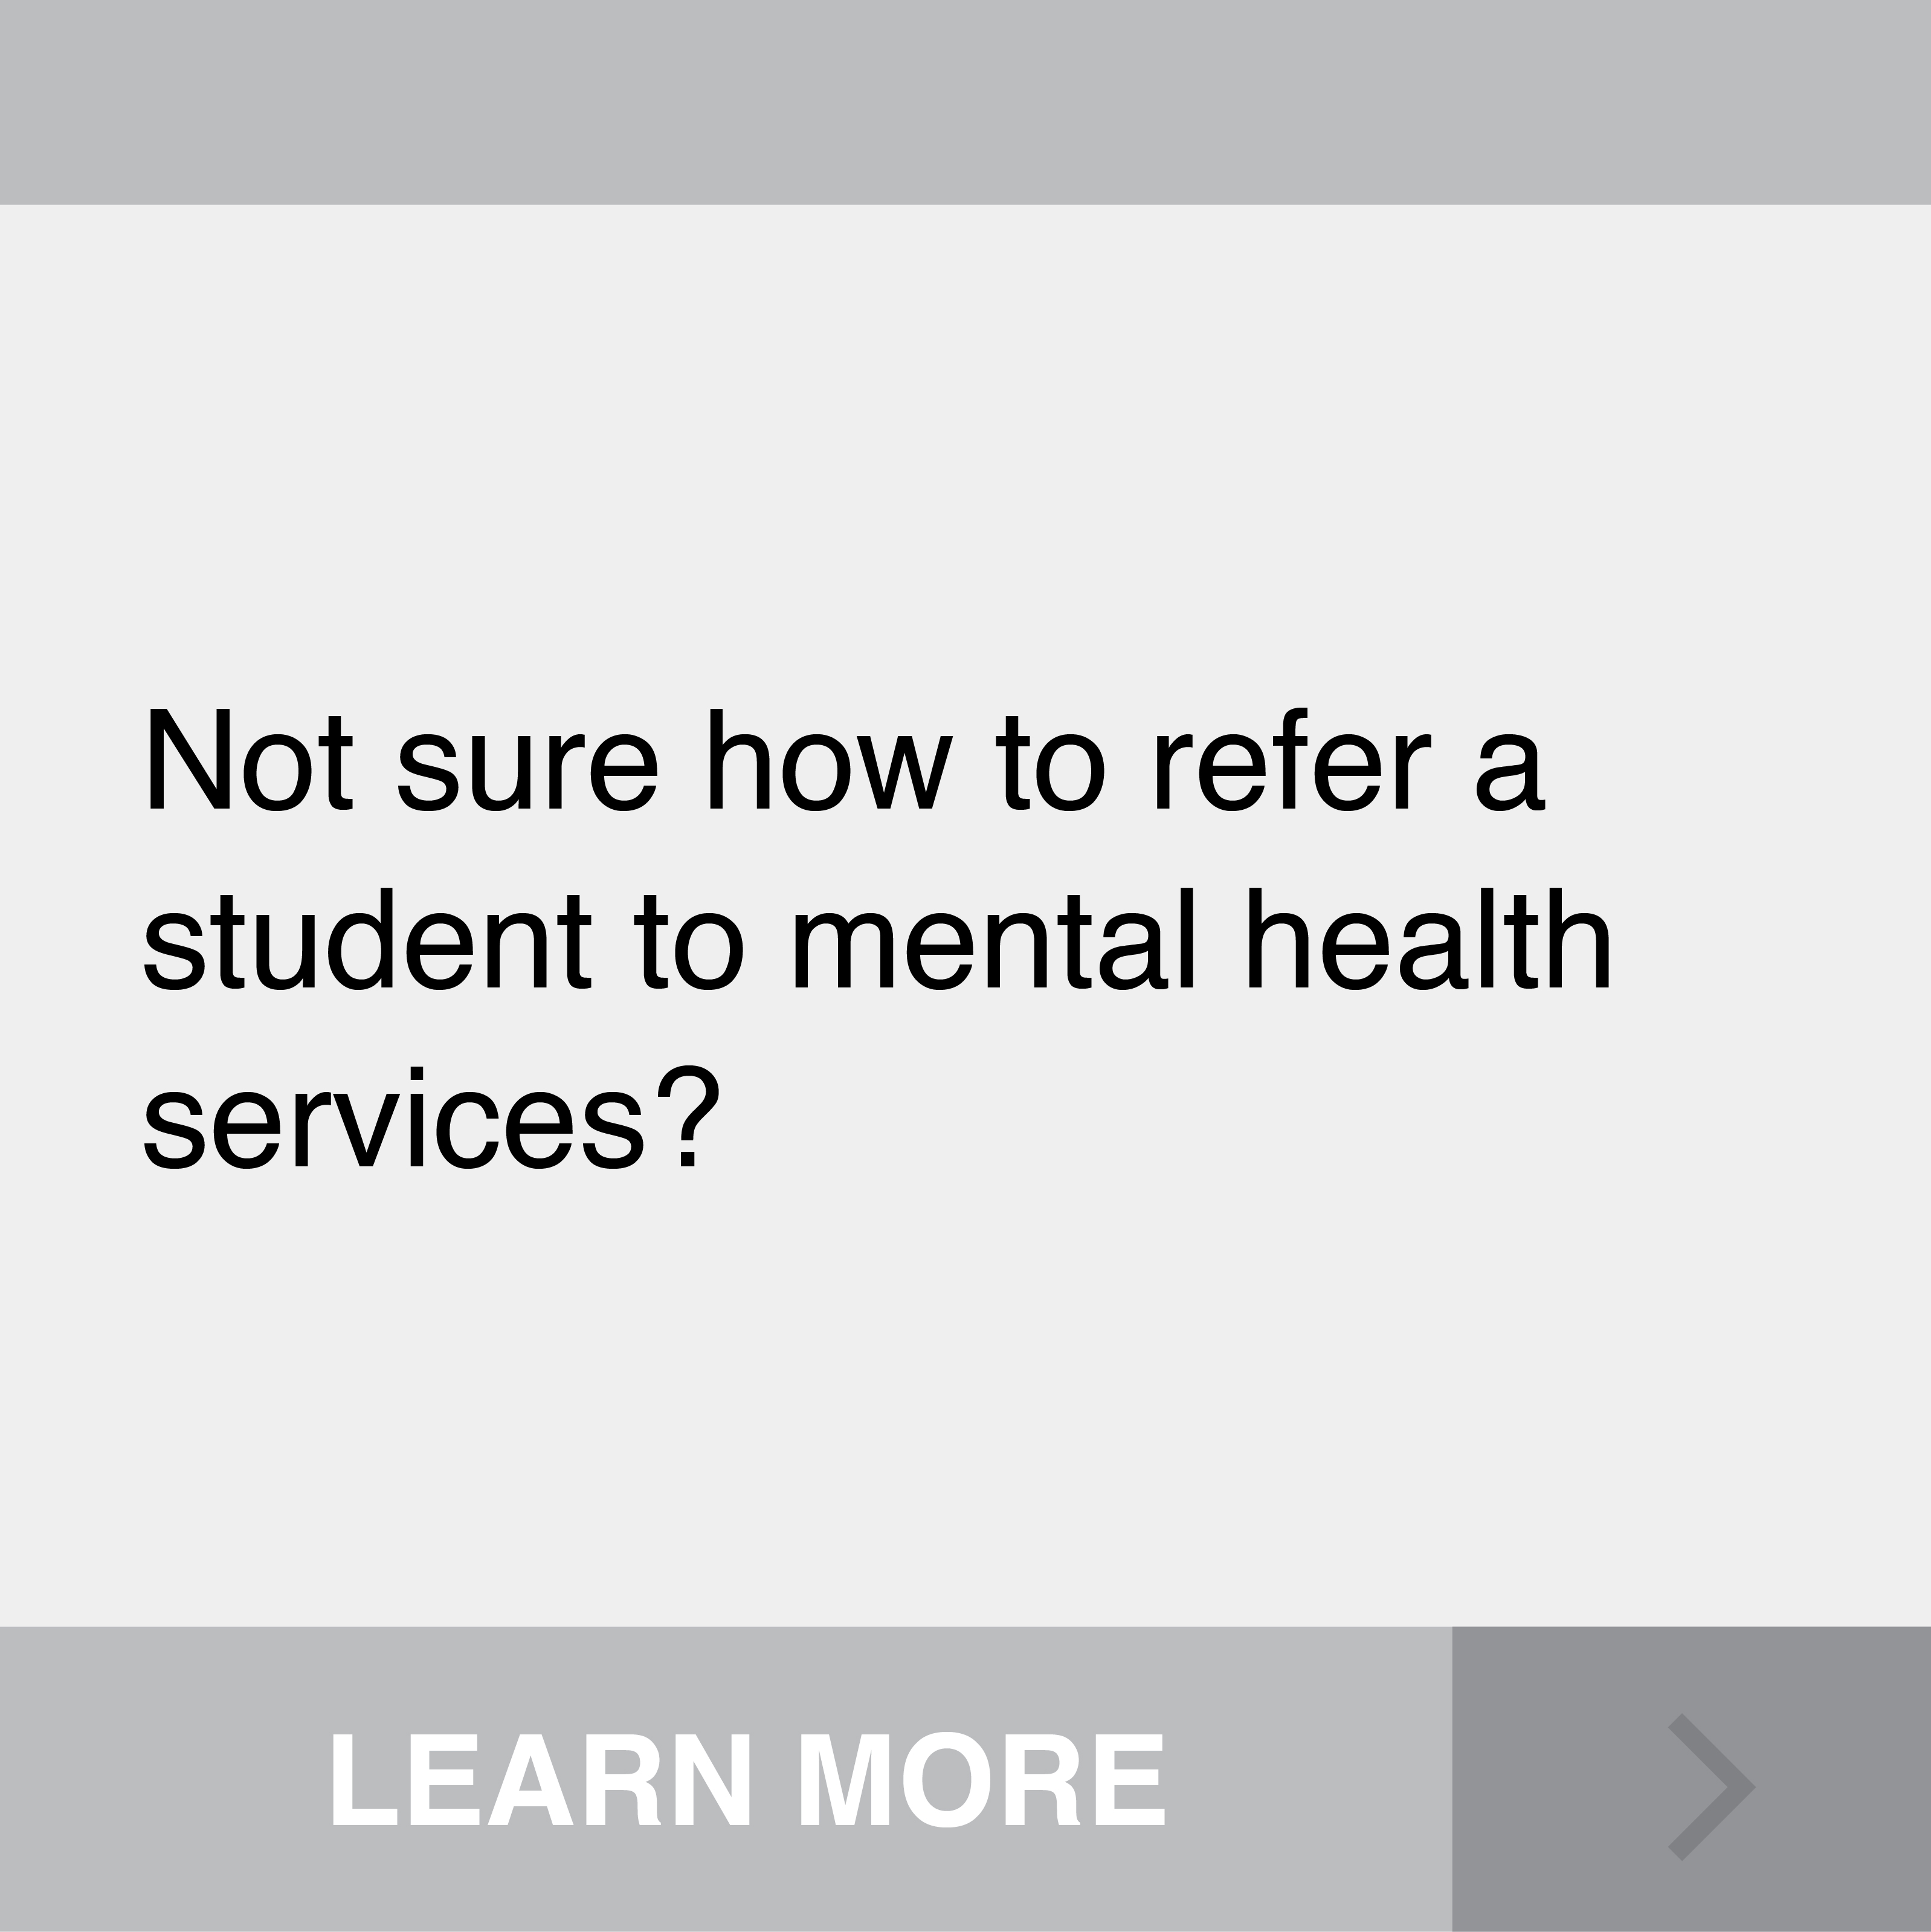 Not sure how to refer a student to mental health services? Click to Learn More.